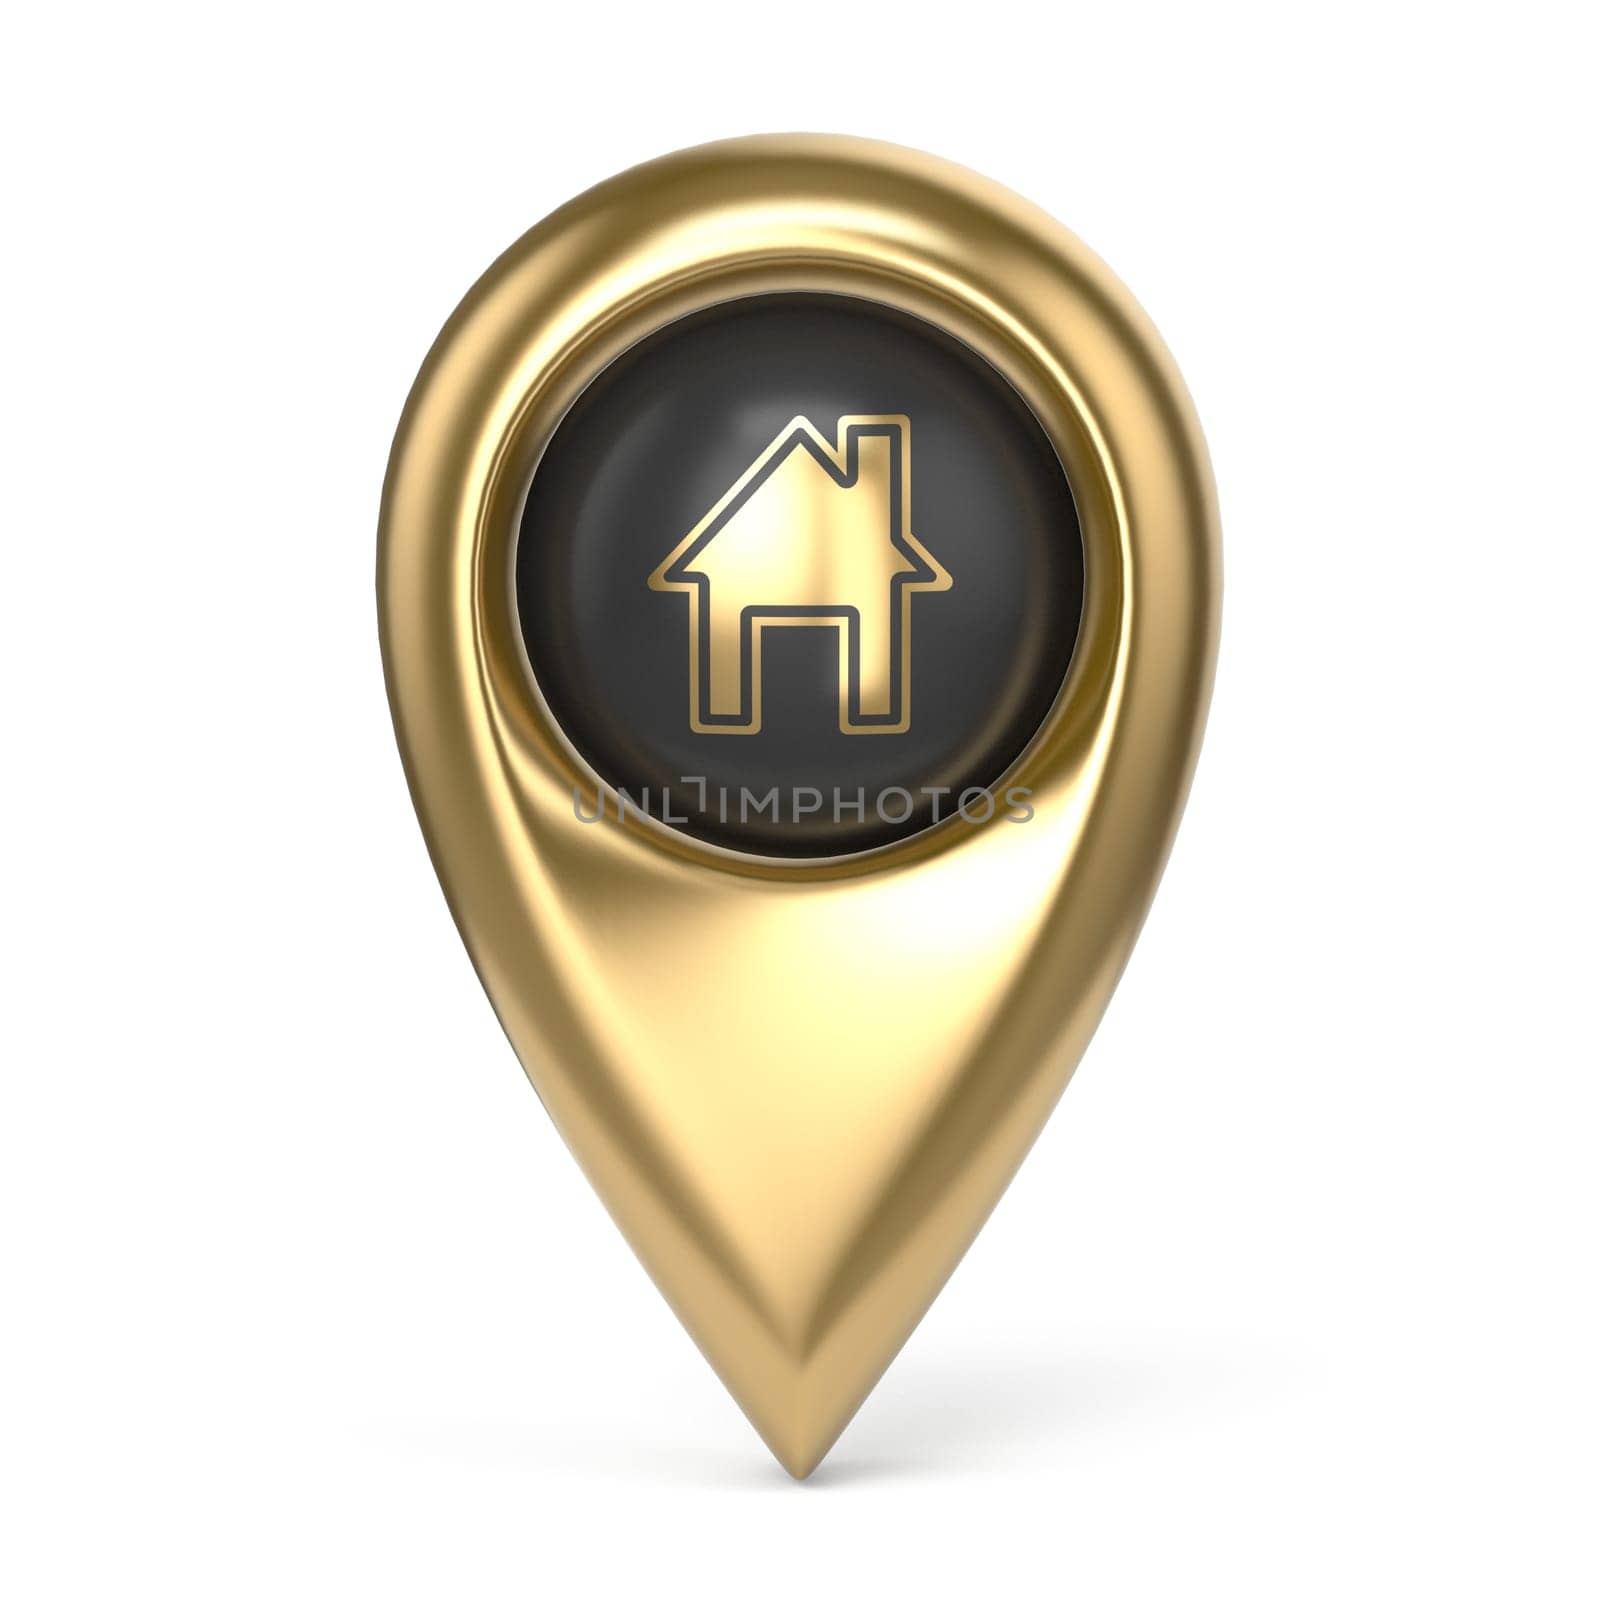 Home map pointer golden 3D rendering illustration isolated on white background